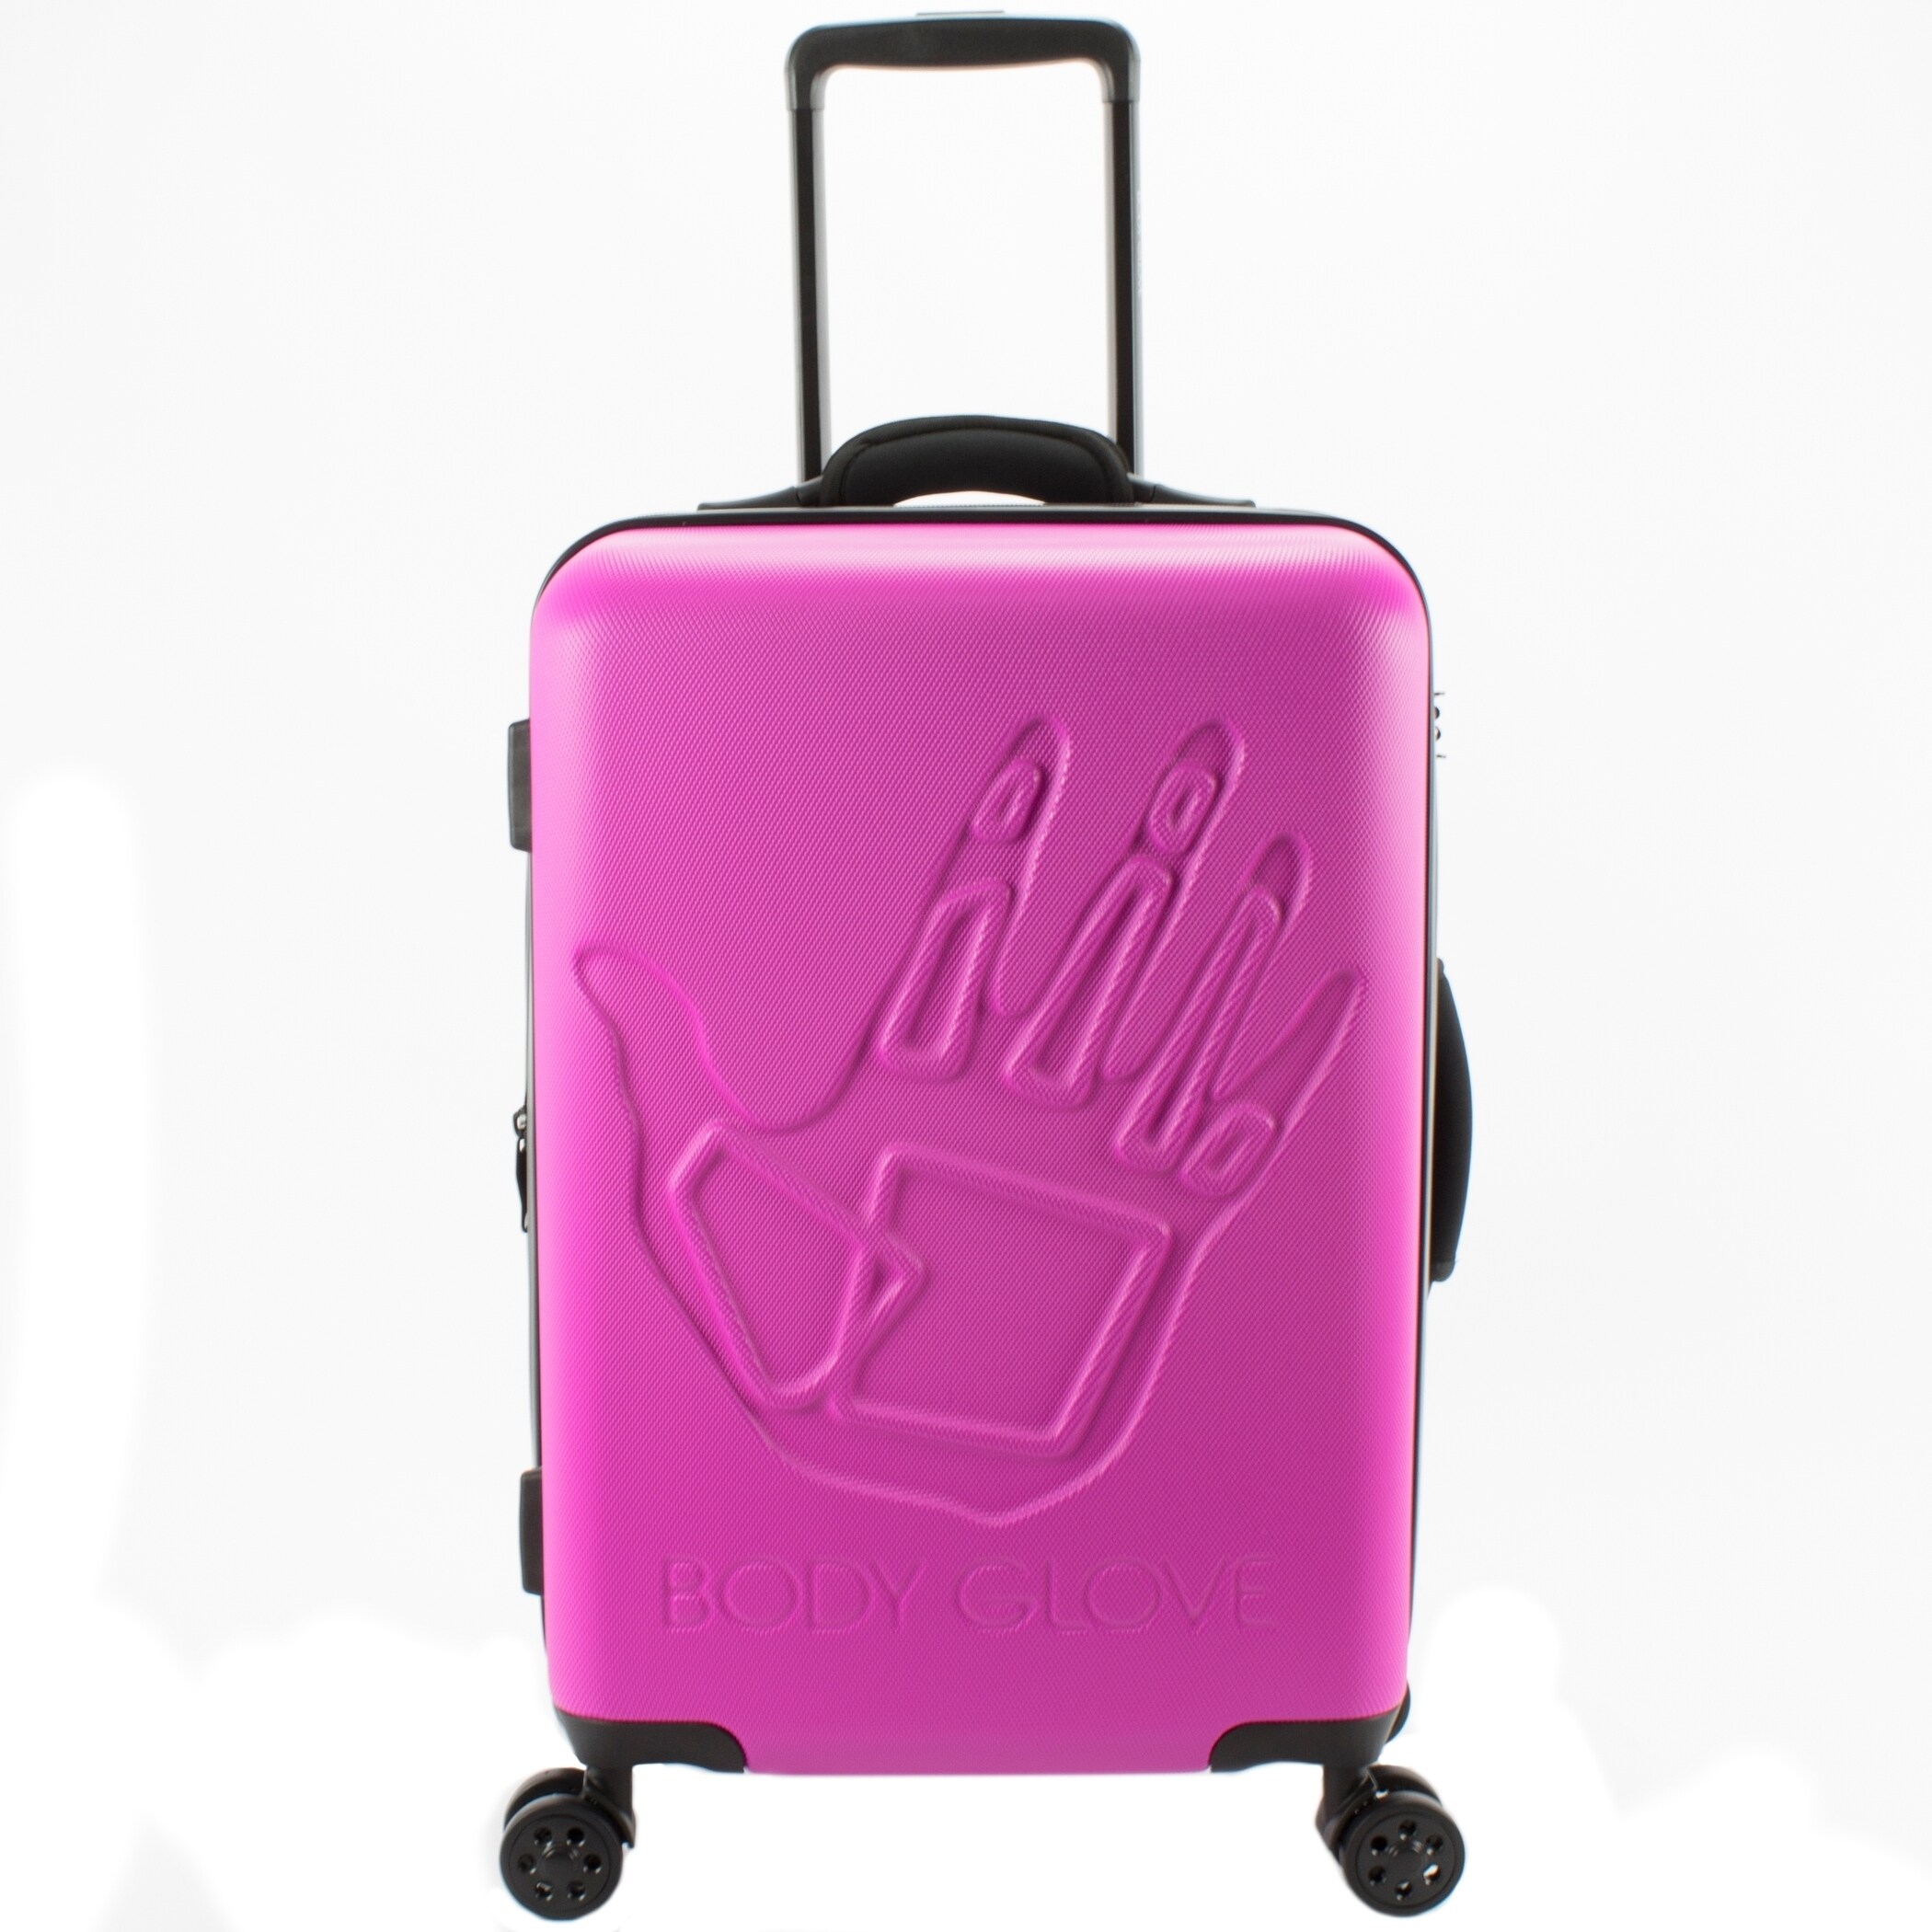 pink suitcase carry on